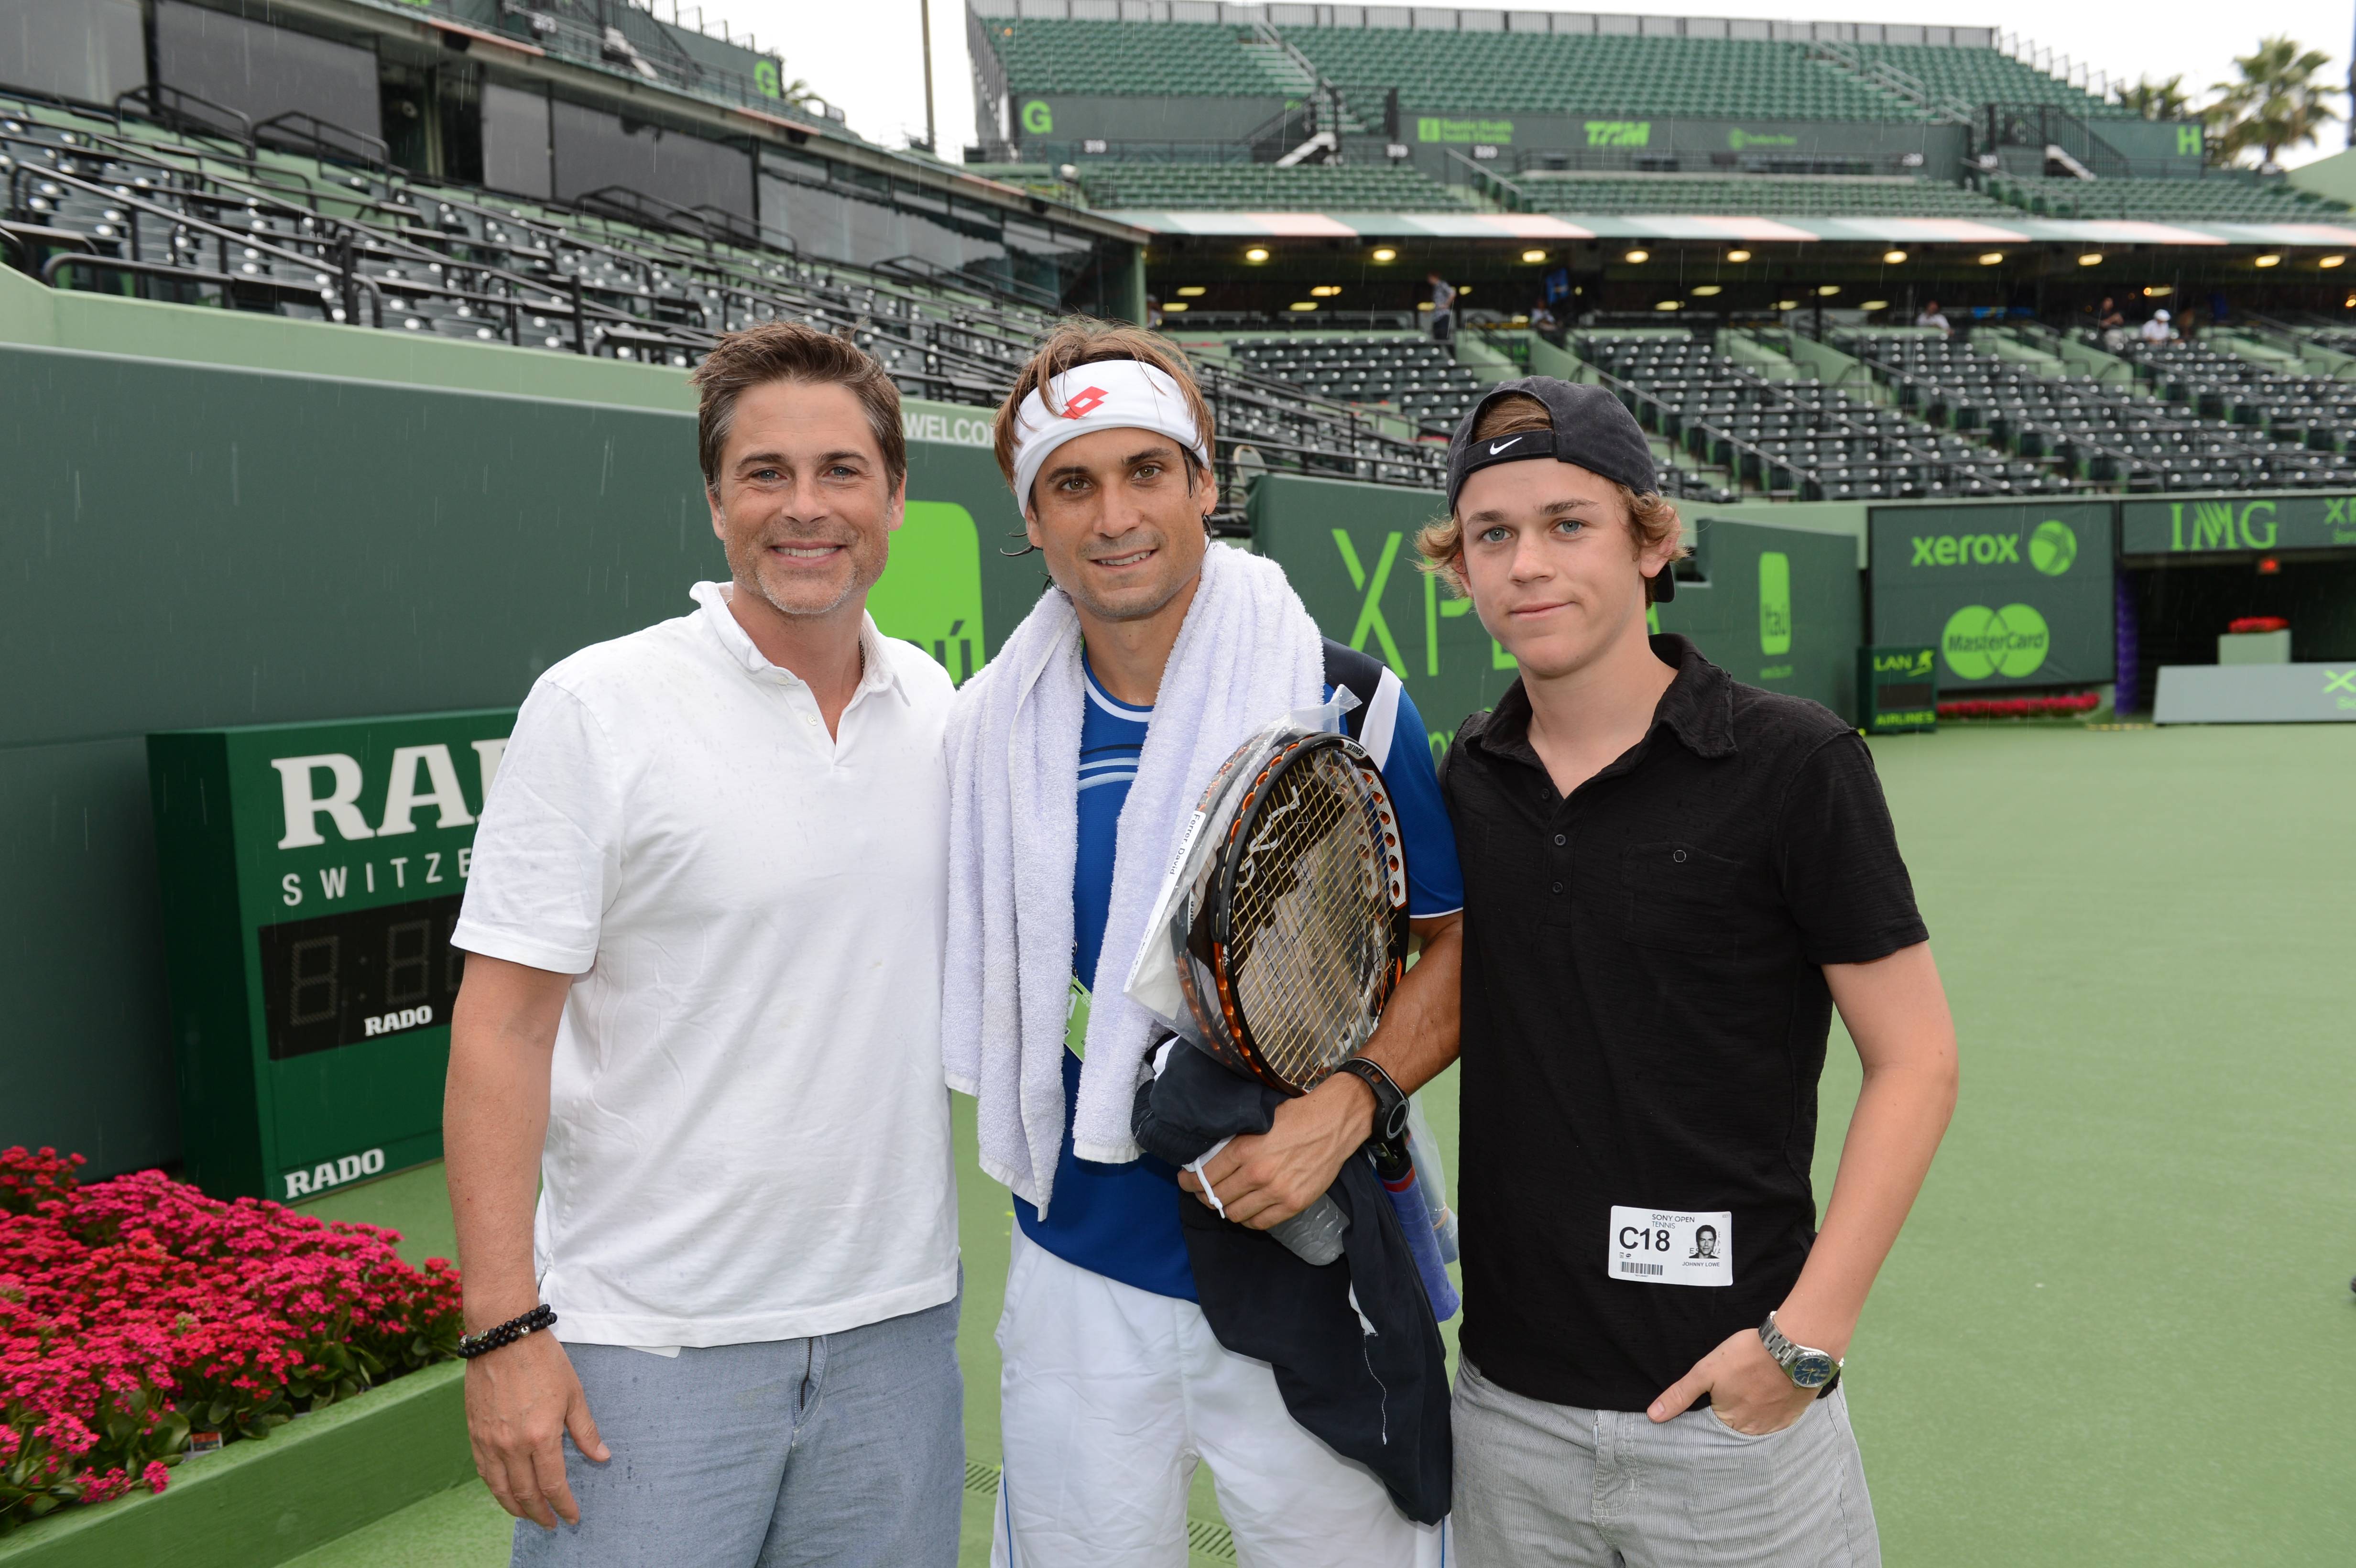 Rob Lowe At 2013 Sony Open With Spanish Player David Ferrer